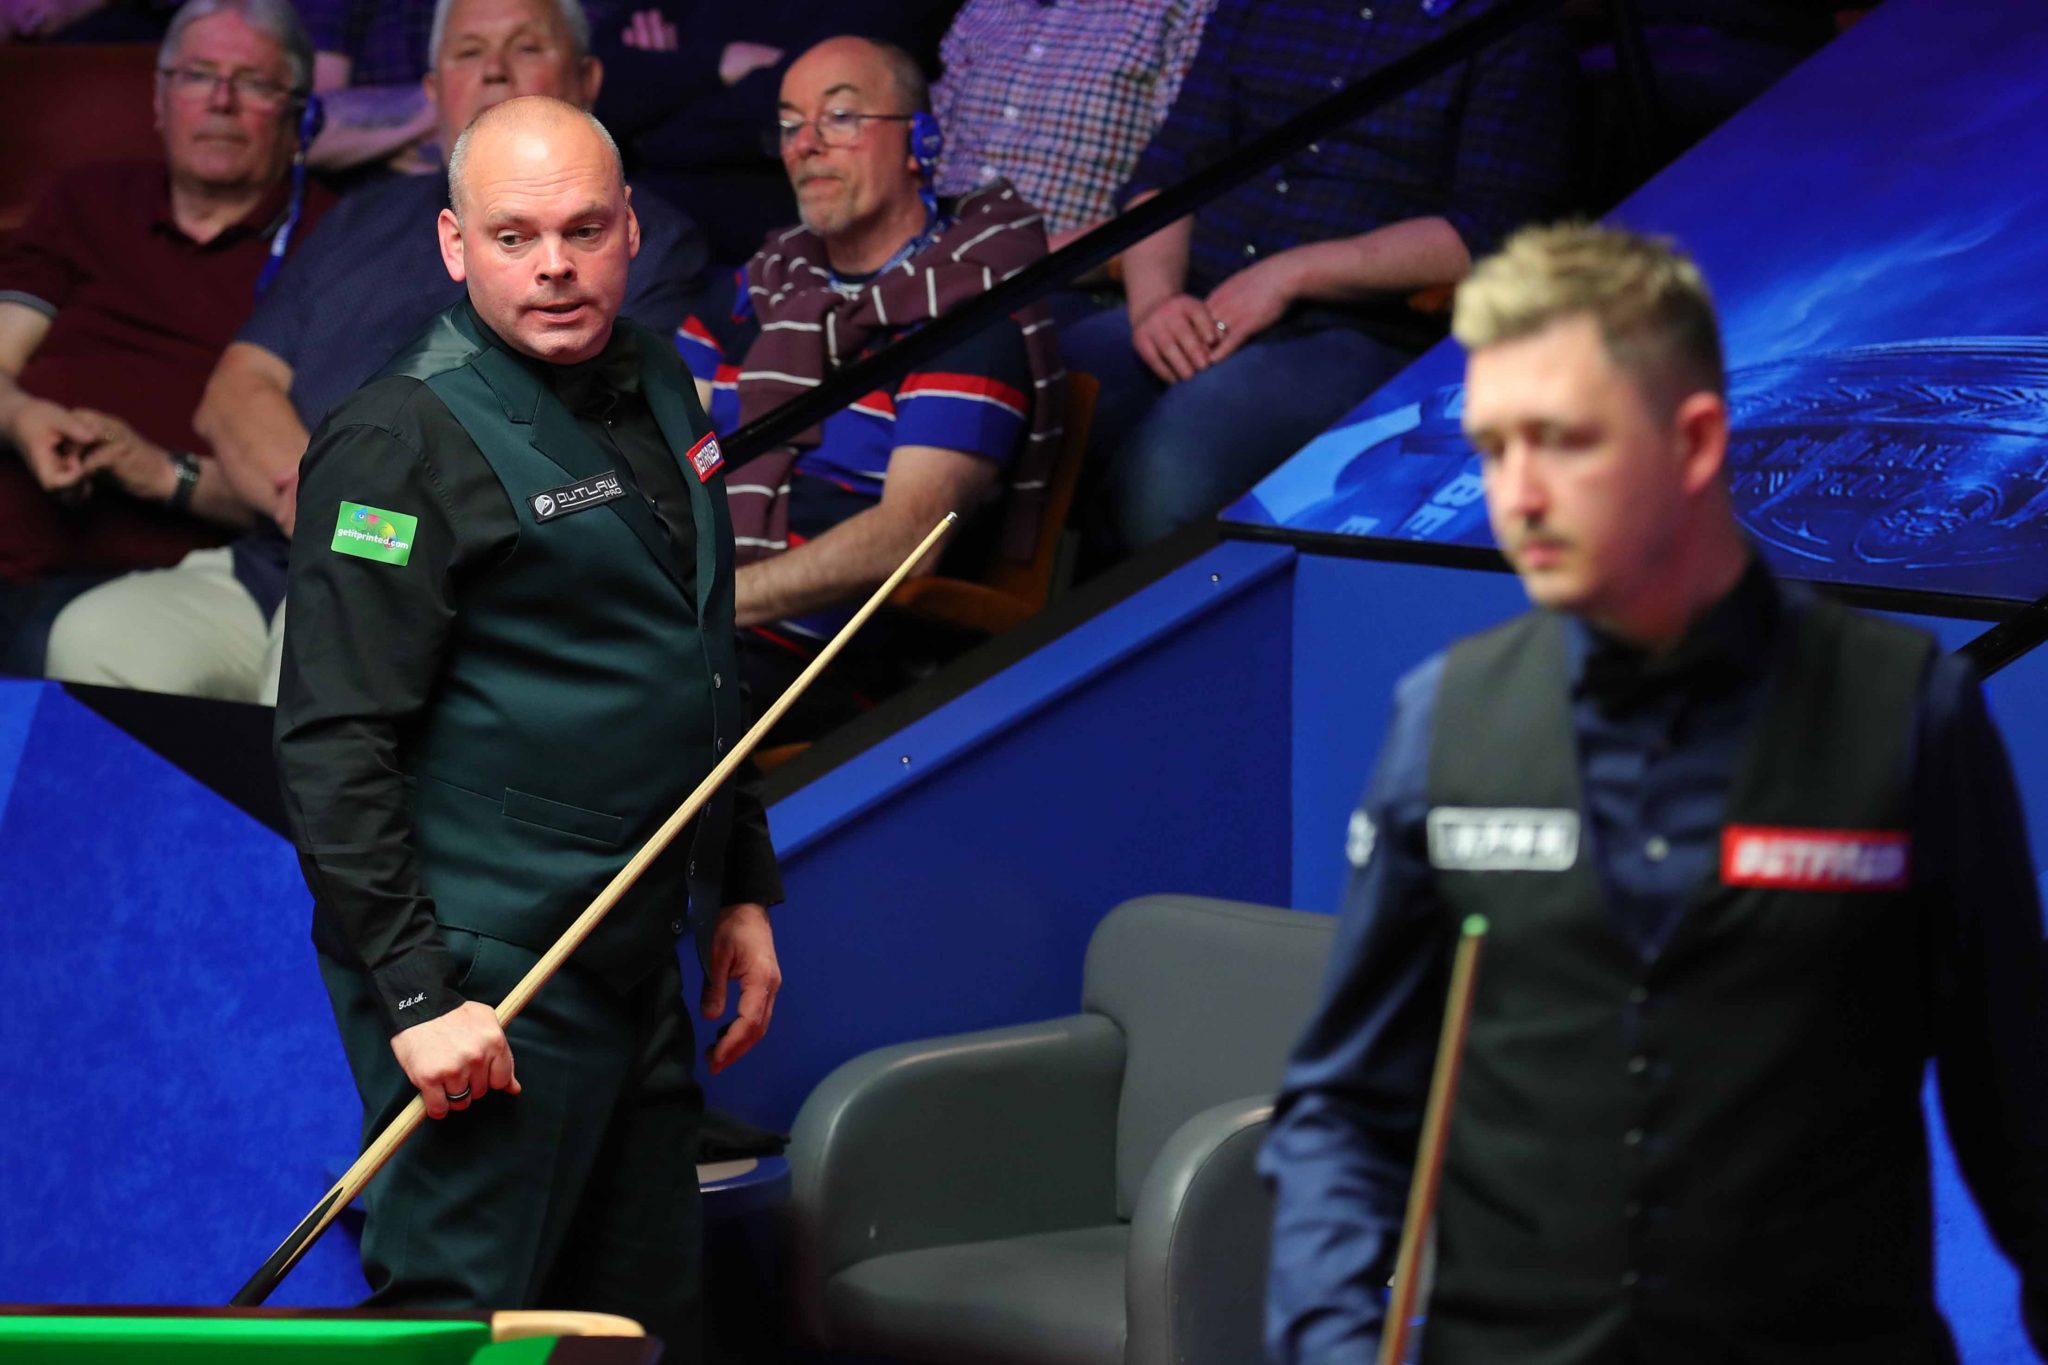 WILSON AND BINGHAM SET FOR GRANDSTAND FINISH